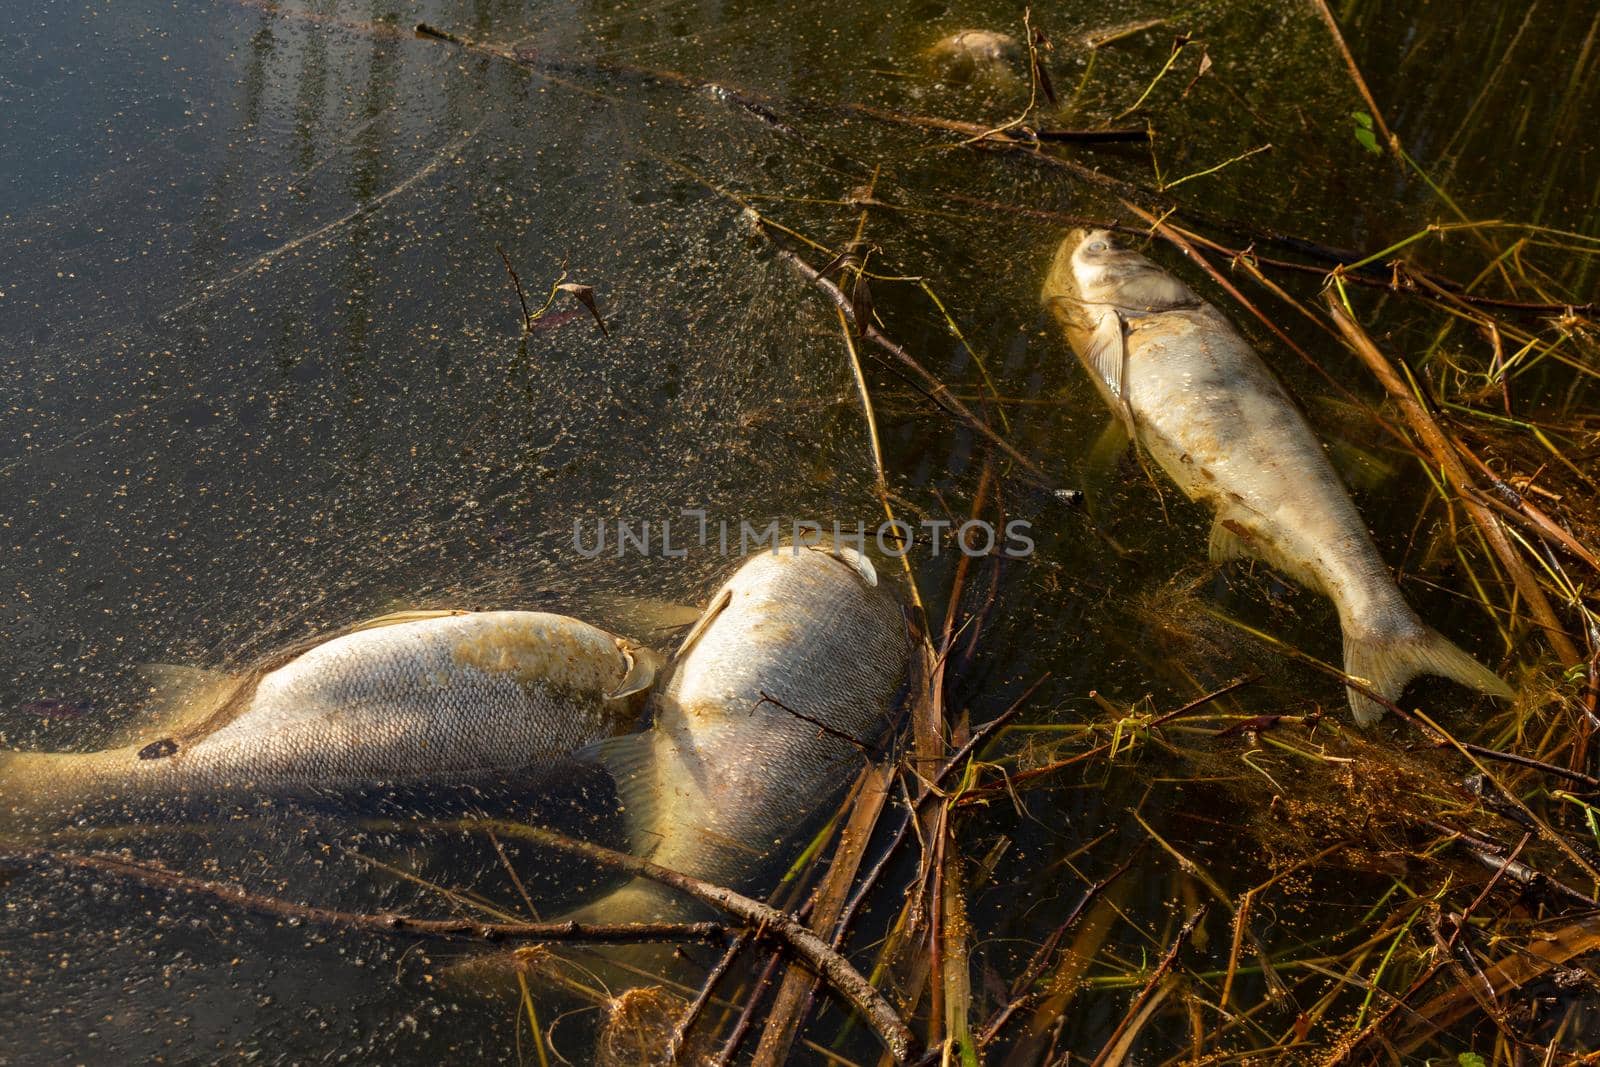 Dead rotten fish on shore of polluted lake. The fish cannot withstand the abnormal heat and dies from lack of oxygen.